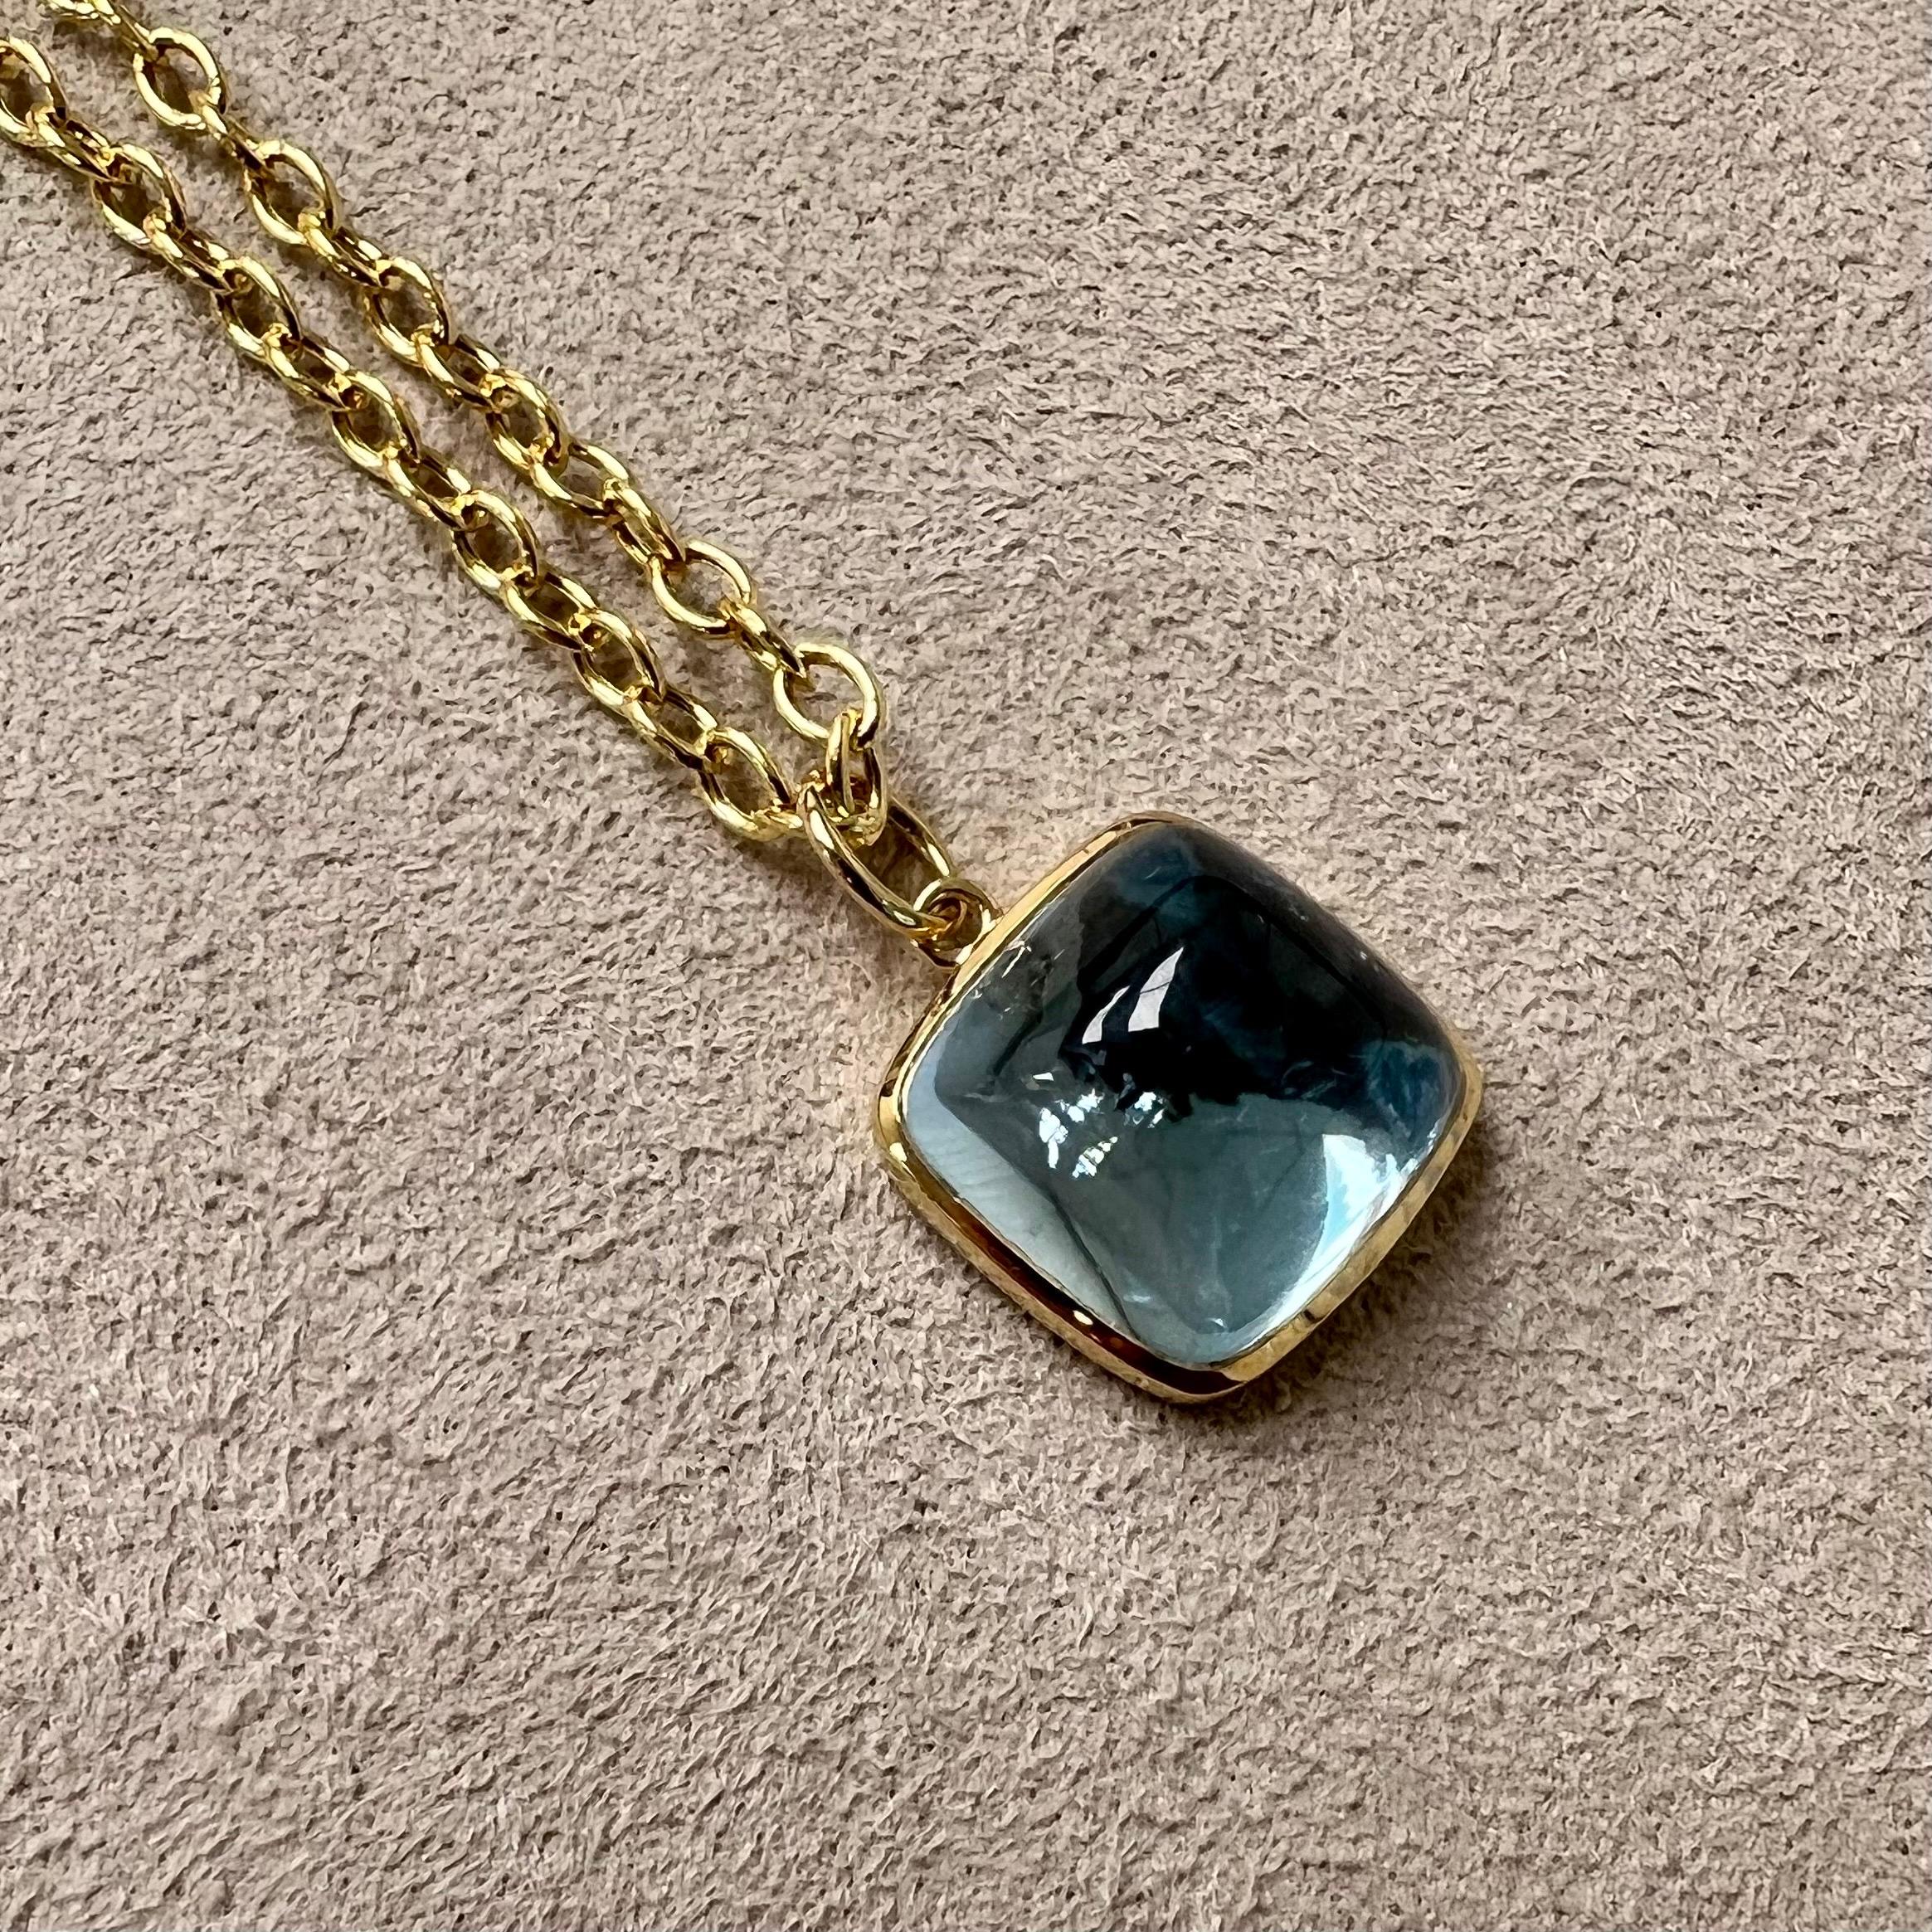 Created in 18 karat yellow gold
Blue topaz 12 carats approx.
Chain sold separately 

Treat yourself to a little sweetness with this Blue Topaz Sugarloaf Pendant! Crafted in 18K yellow gold, it features a 12-carat blue topaz stone for a touch of